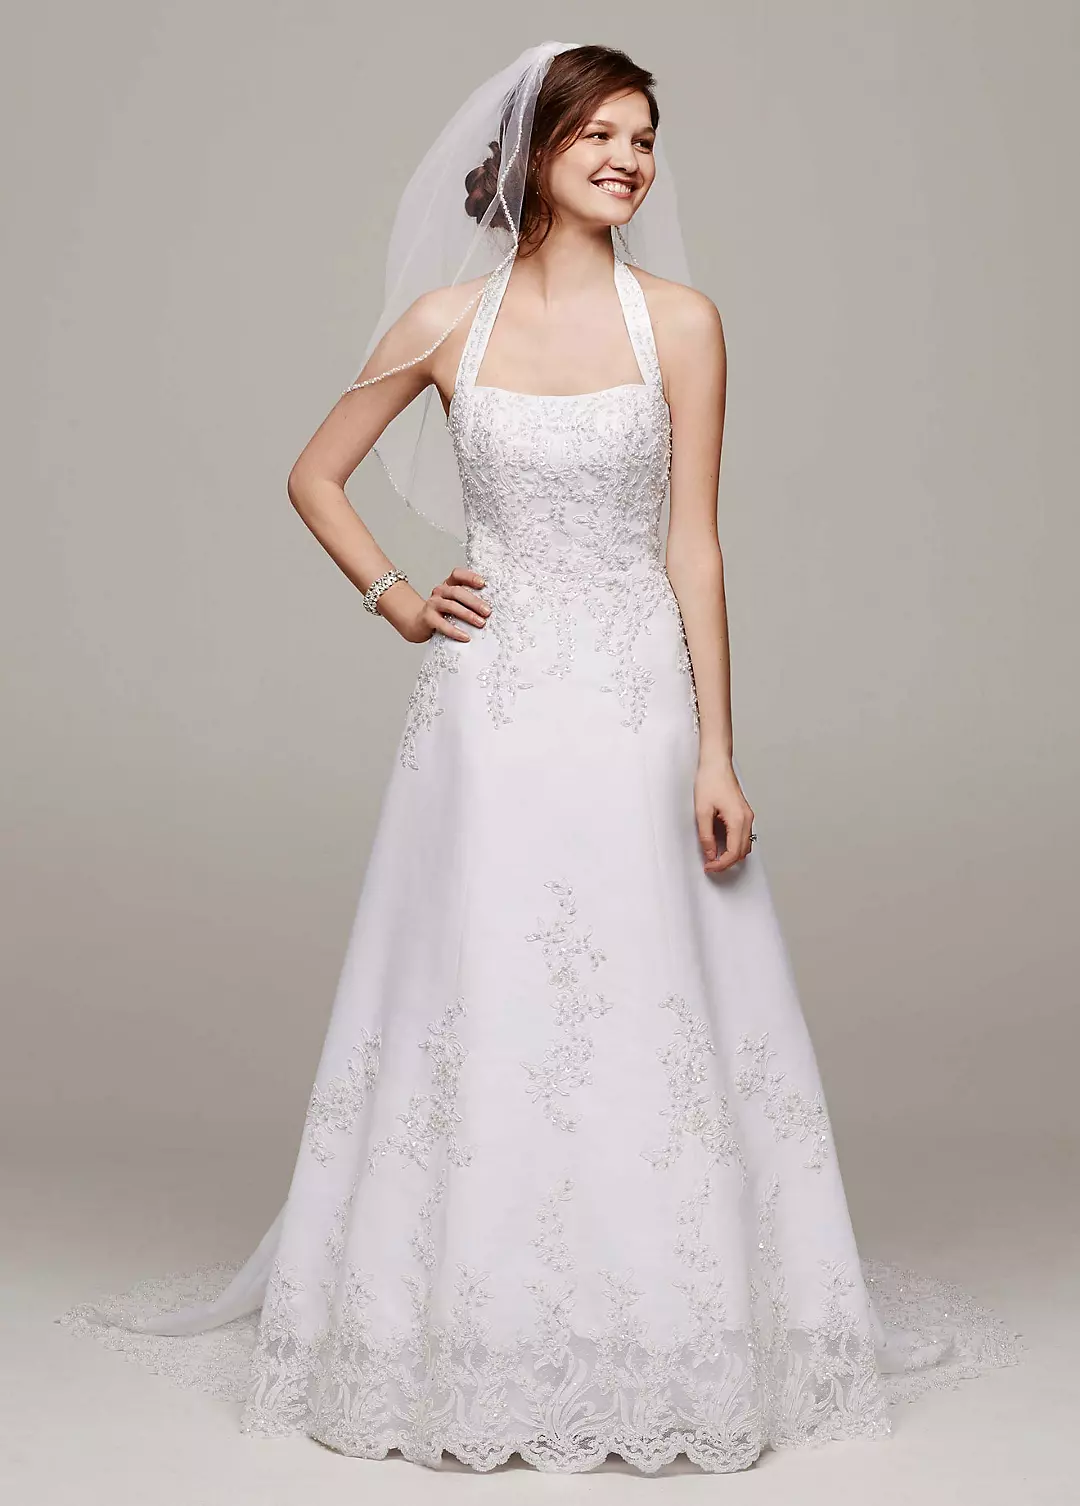 Satin Halter A-line Wedding Dress with Beaded Lace Image